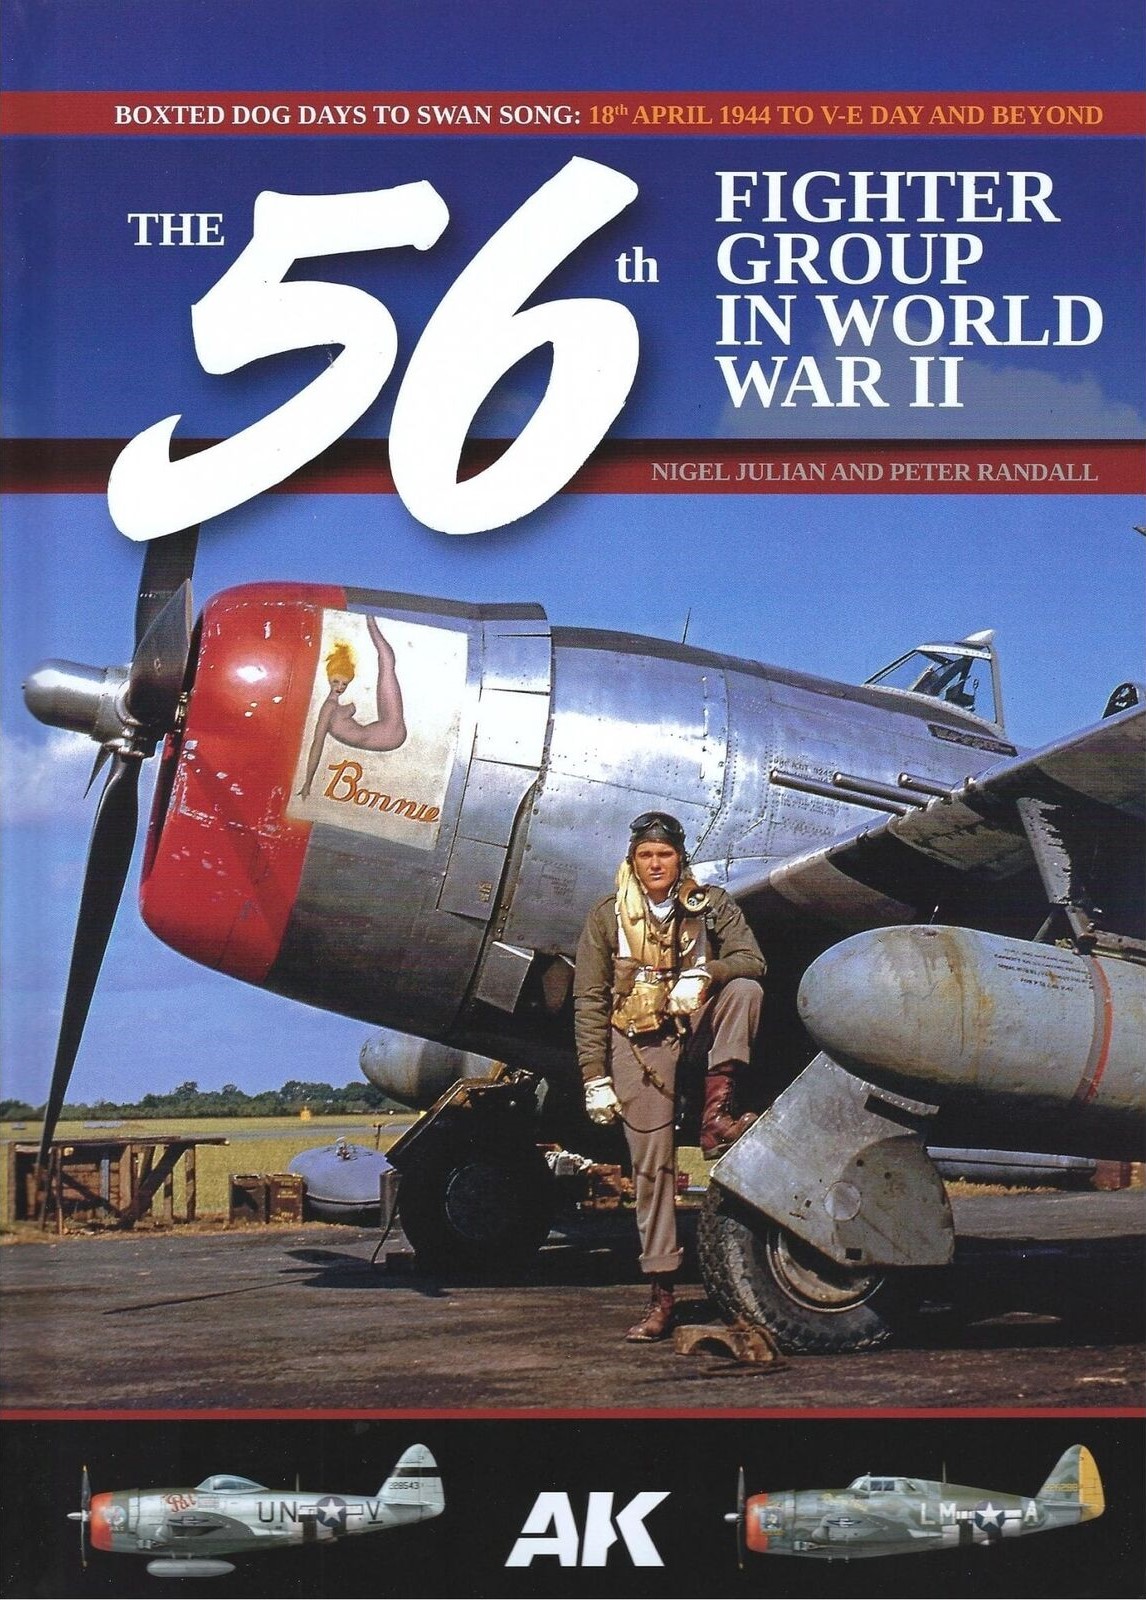 The 56th Fighter Group in World War II